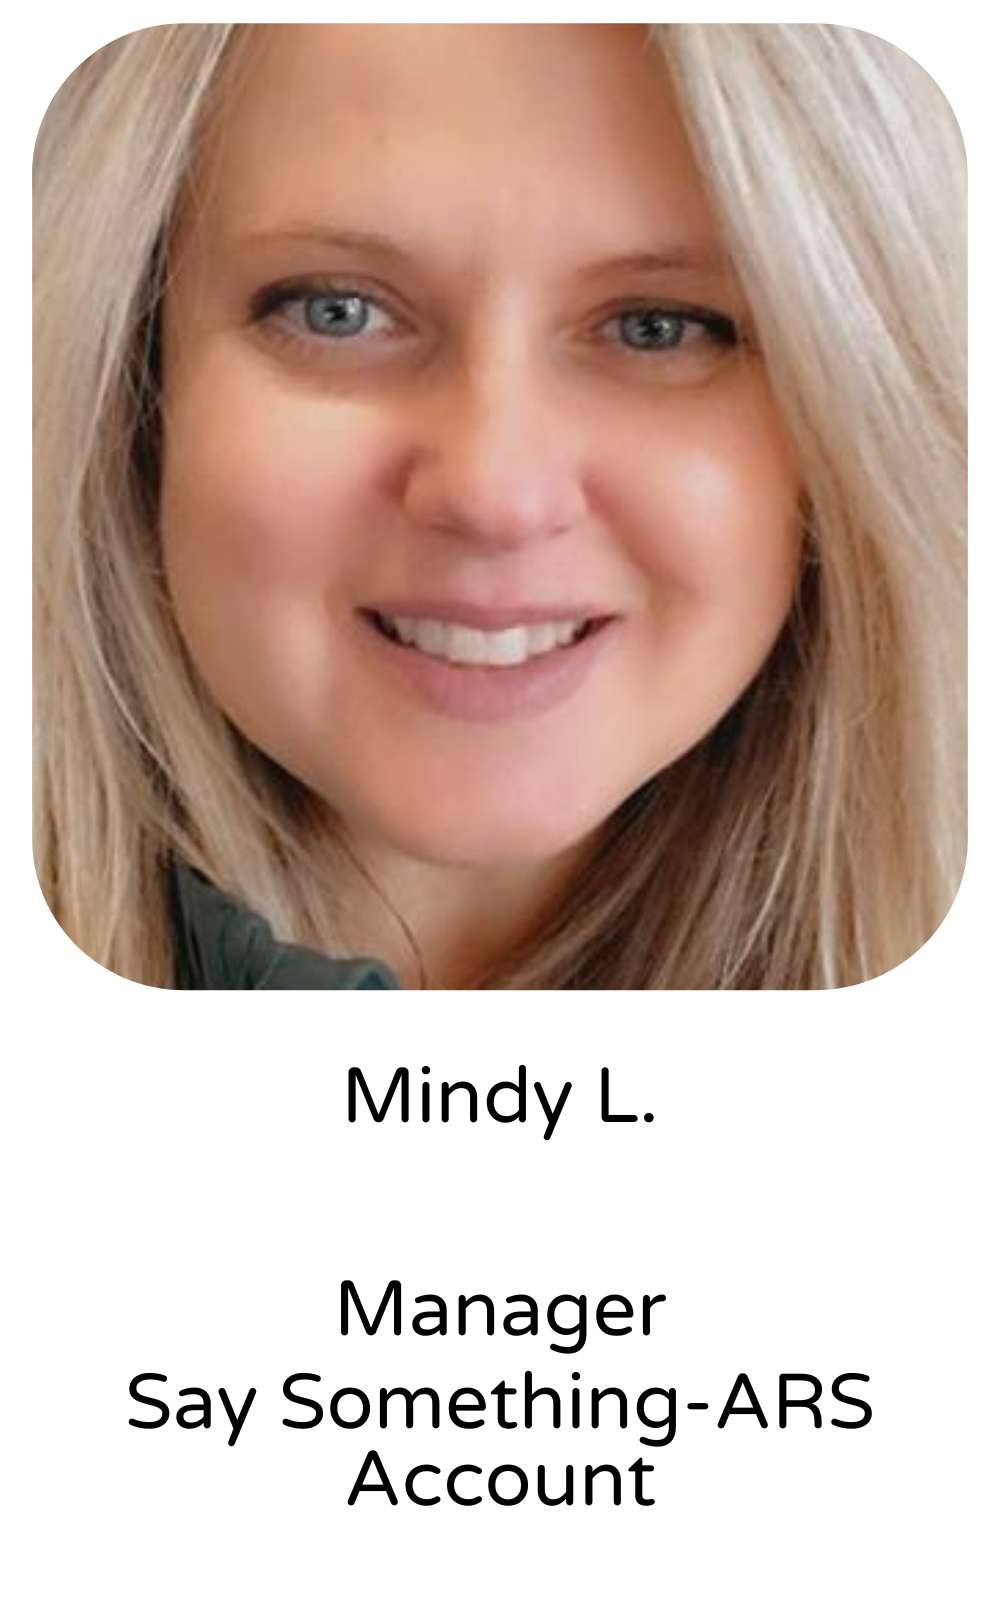 Mindy L., Manager, Say Something-ARS Account